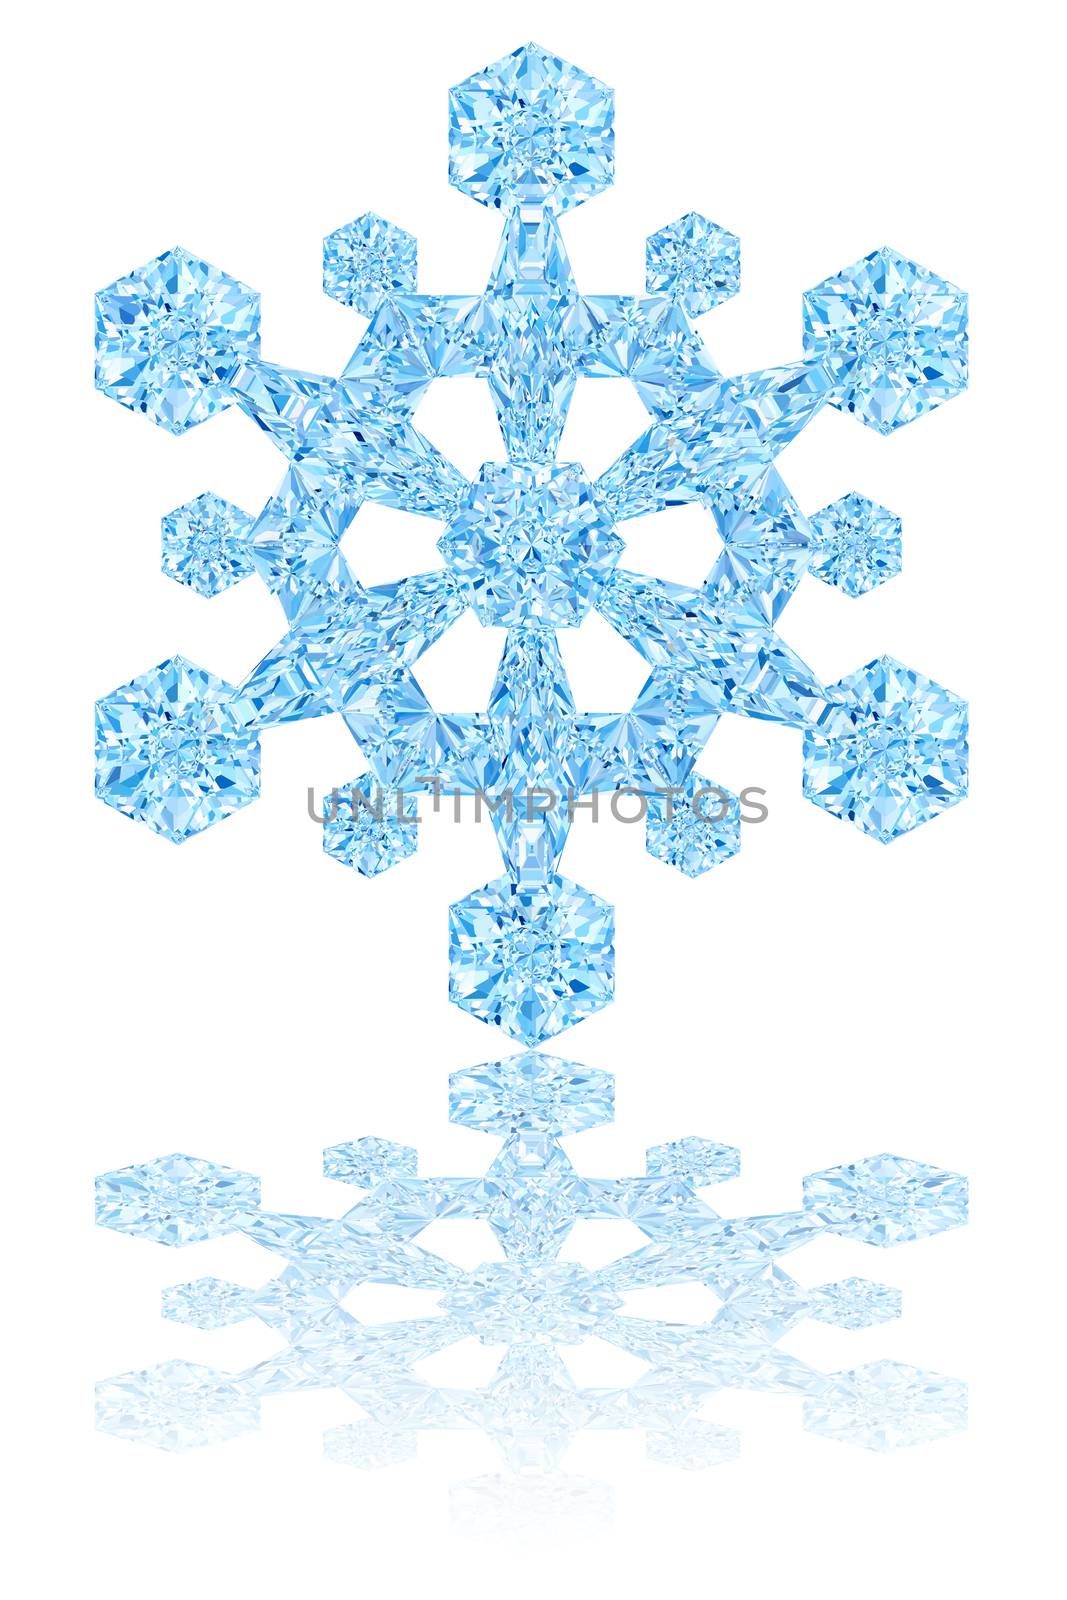 Light blue crystal snowflake on glossy white background by oneo